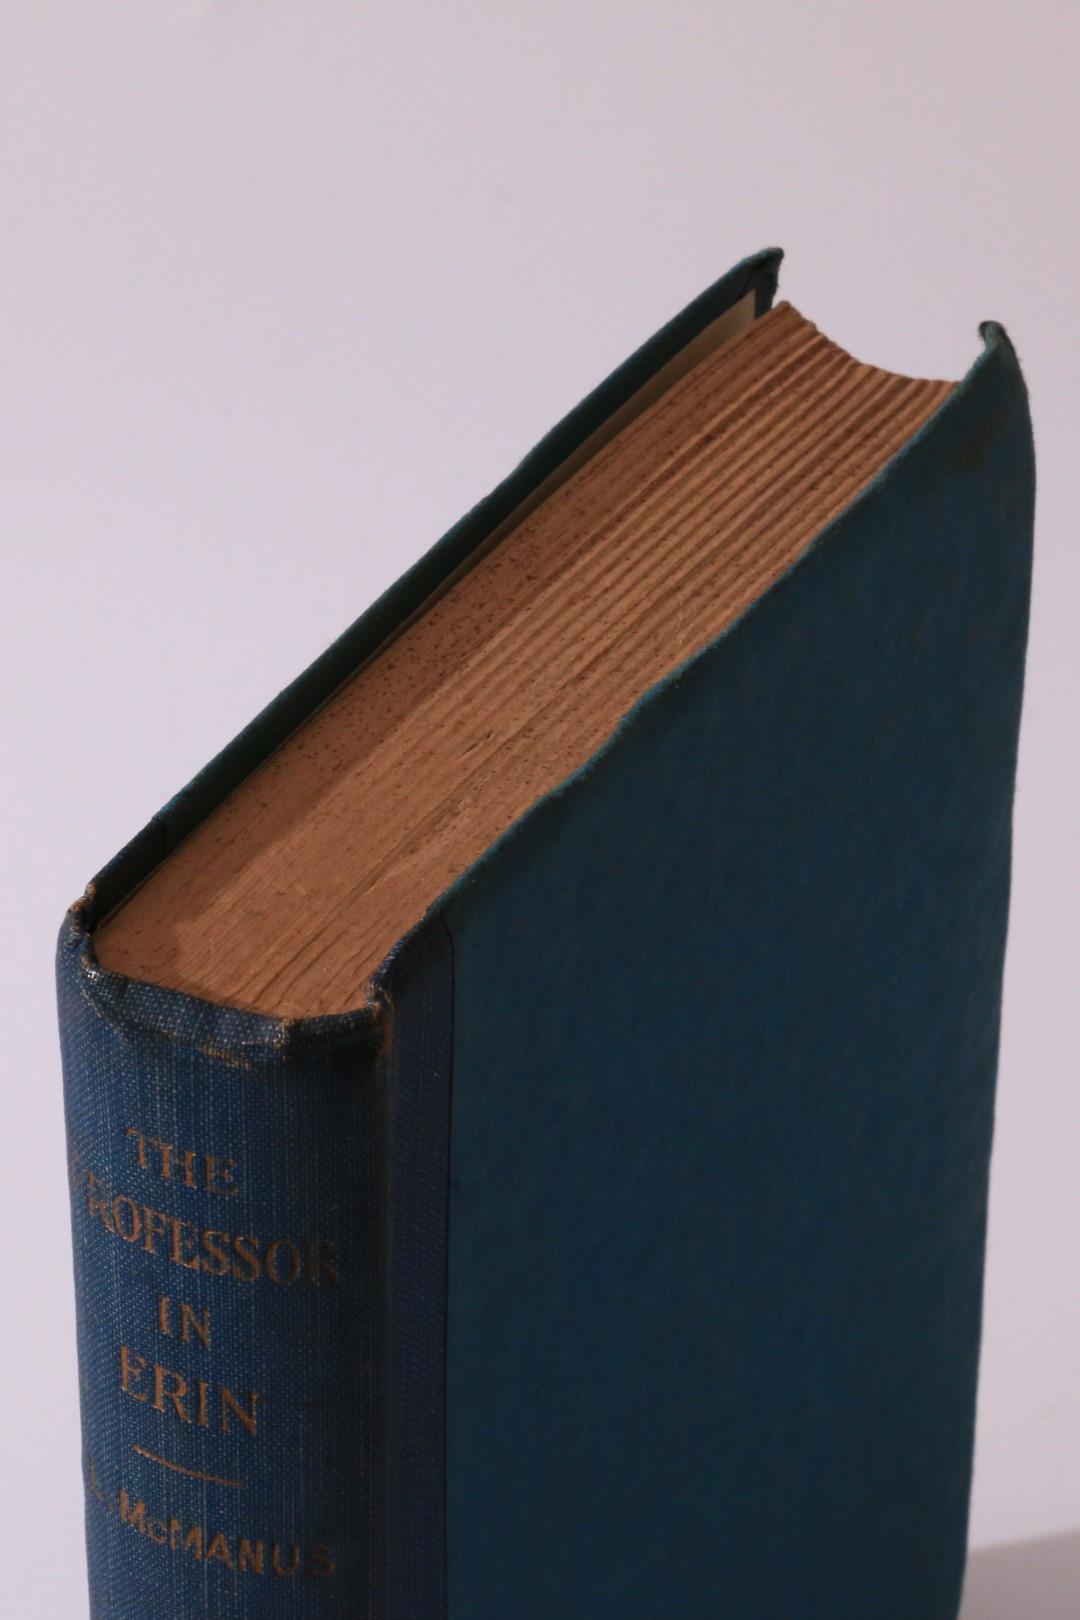 L. McManus - The Professor in Erin - M.H. Gill and Son, 1918, First Edition.